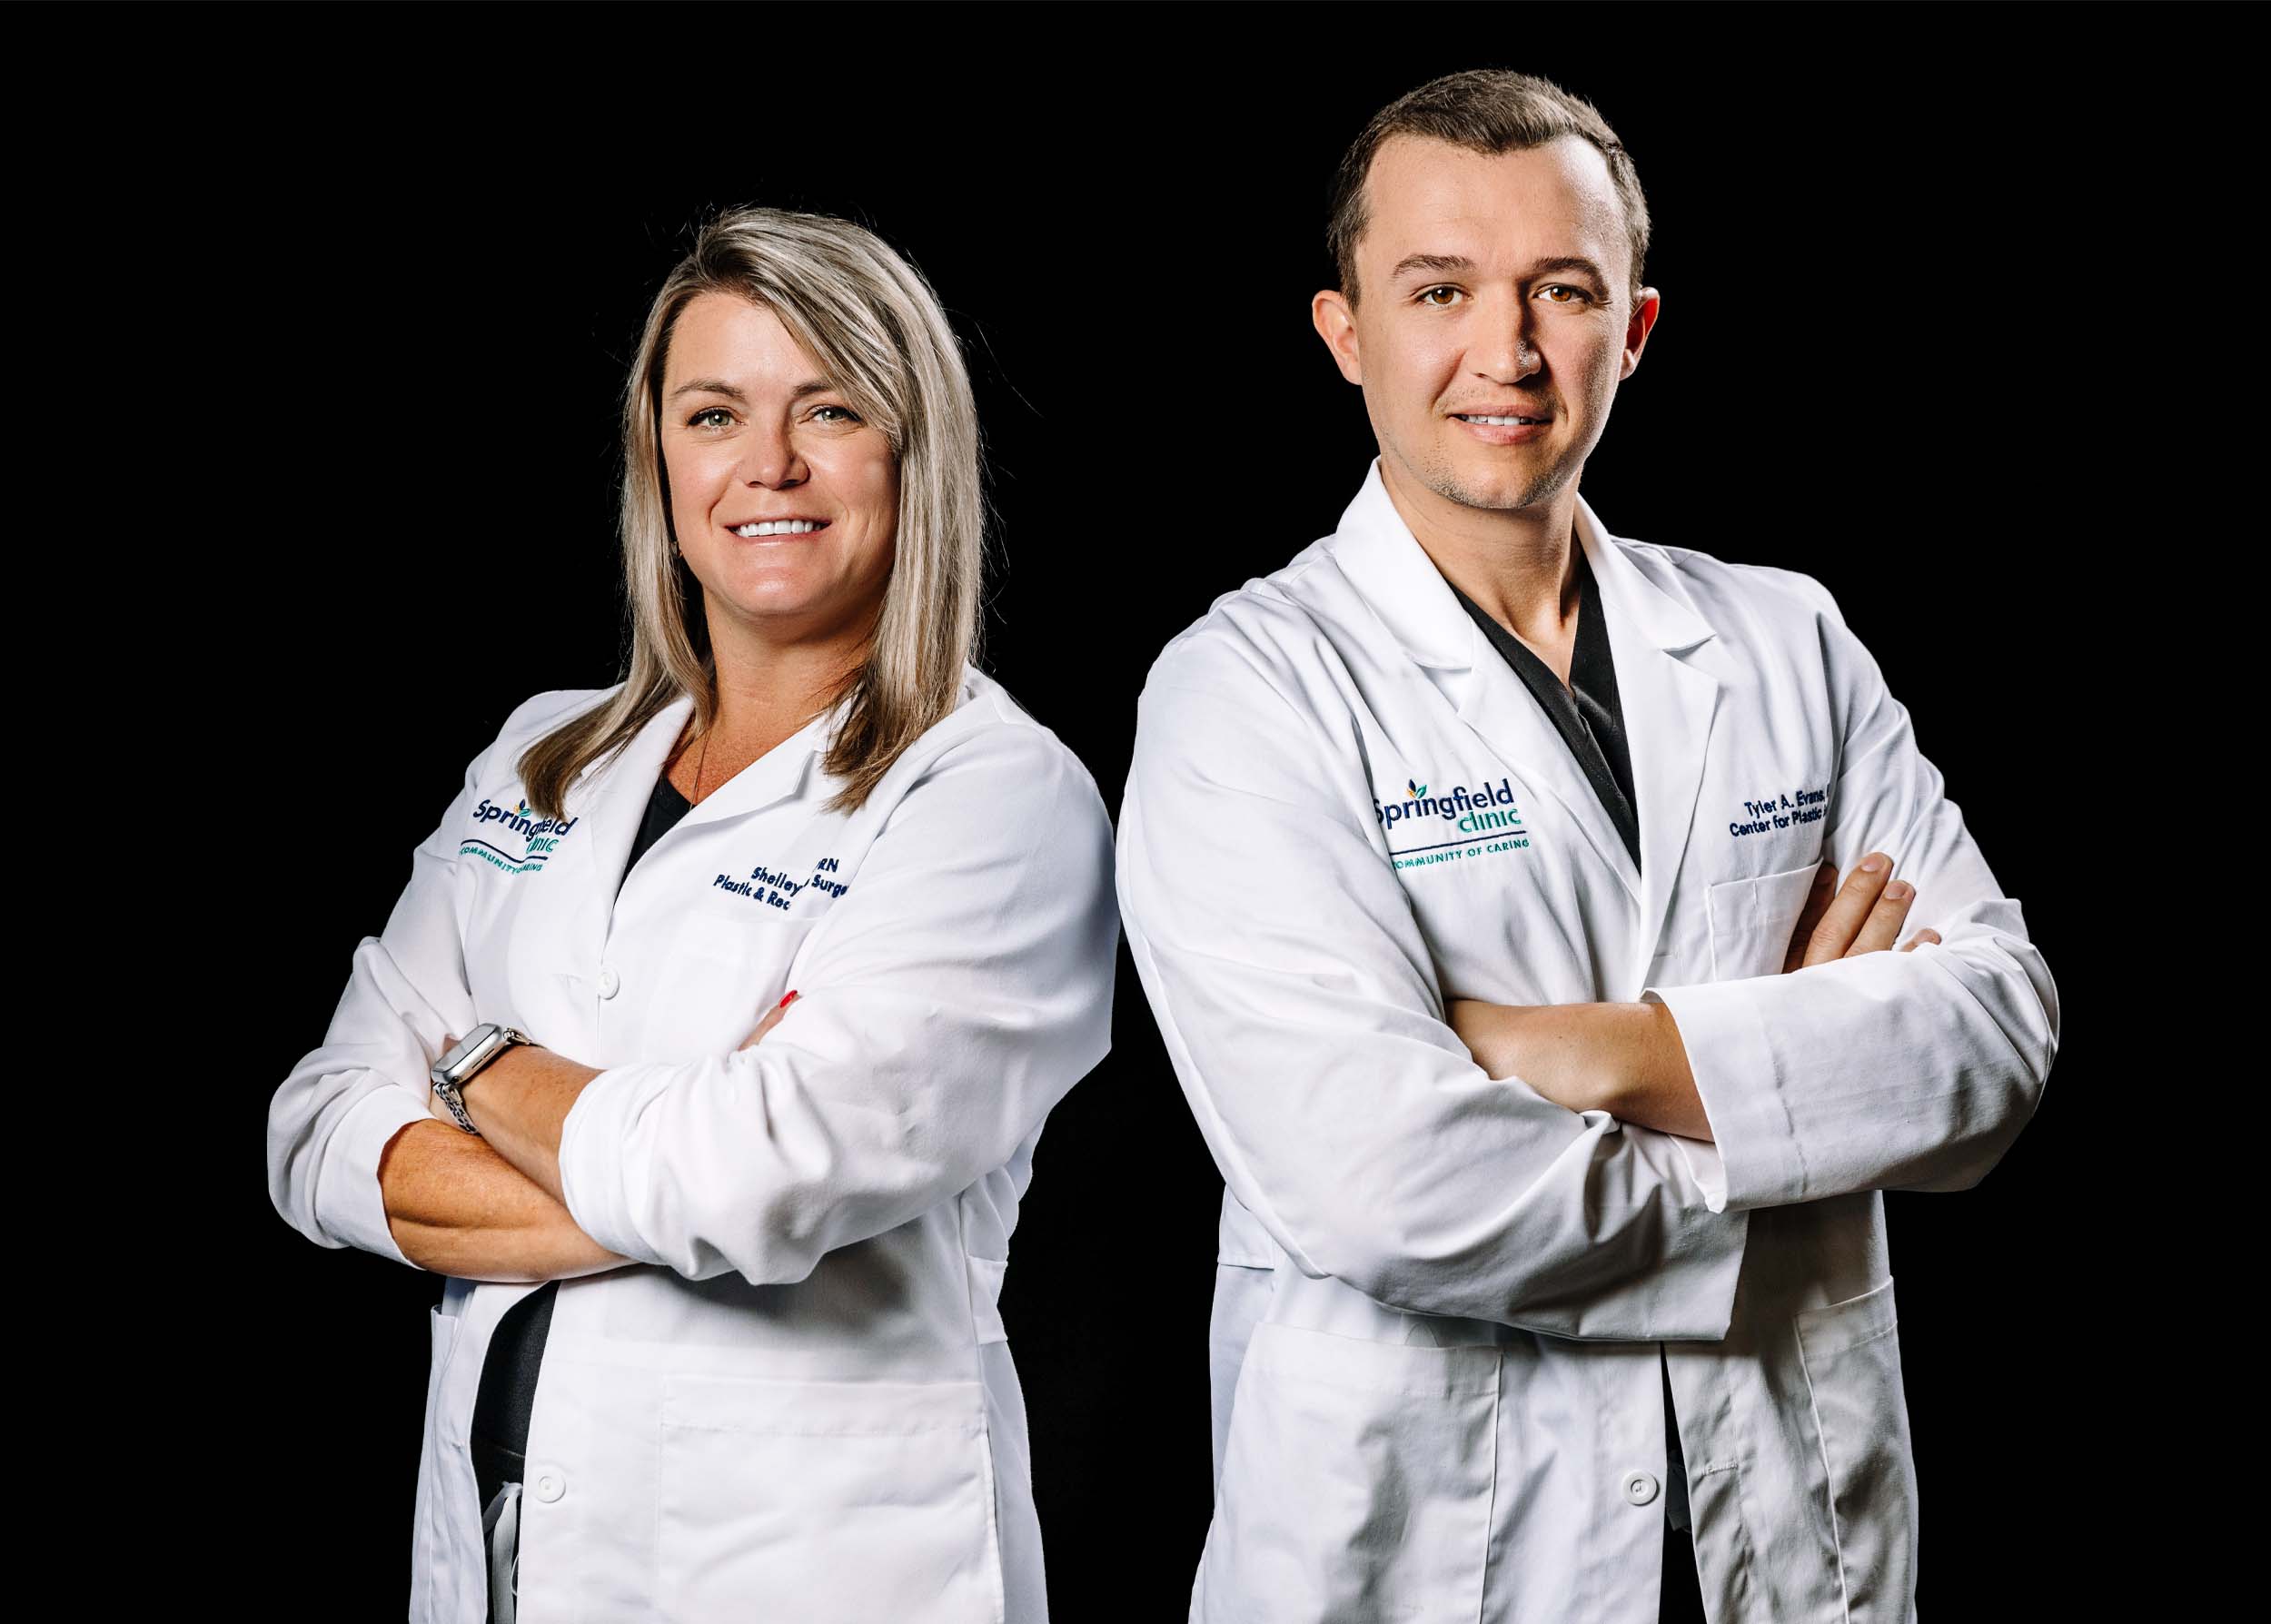 Male plastic surgery doctor smiling next to female nurse practitioner in white coats in front of black backdrop.